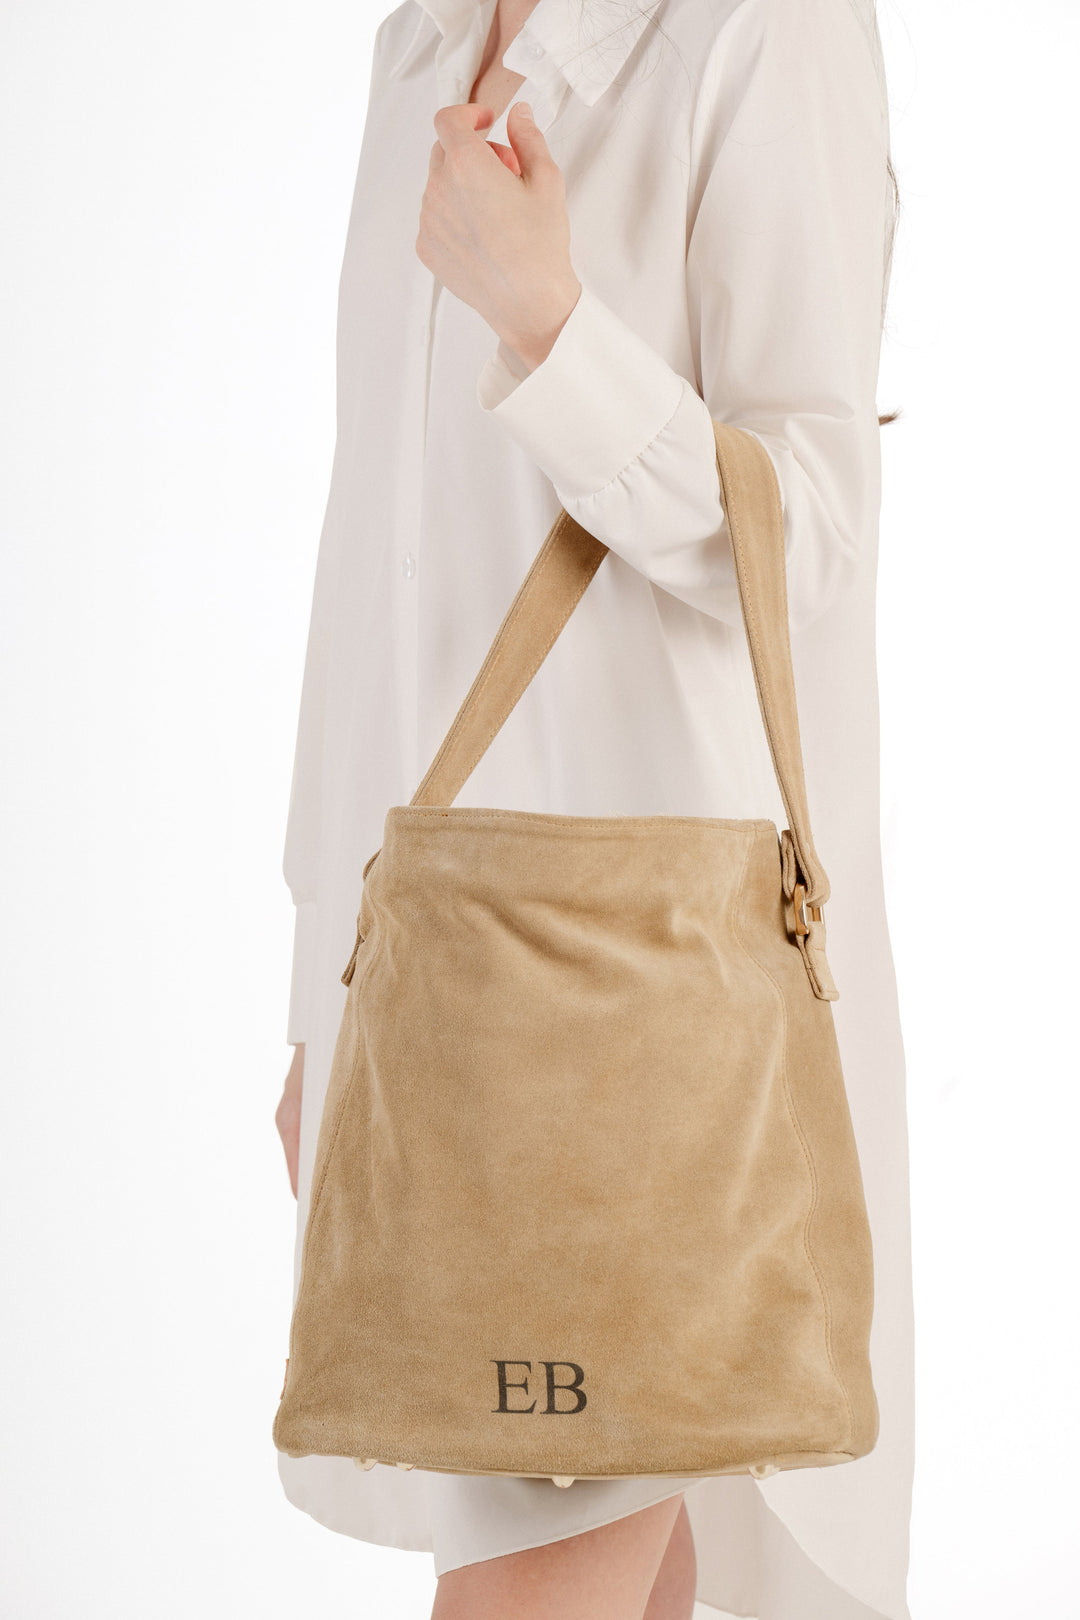 Woman holding beige suede handbag with initials EB